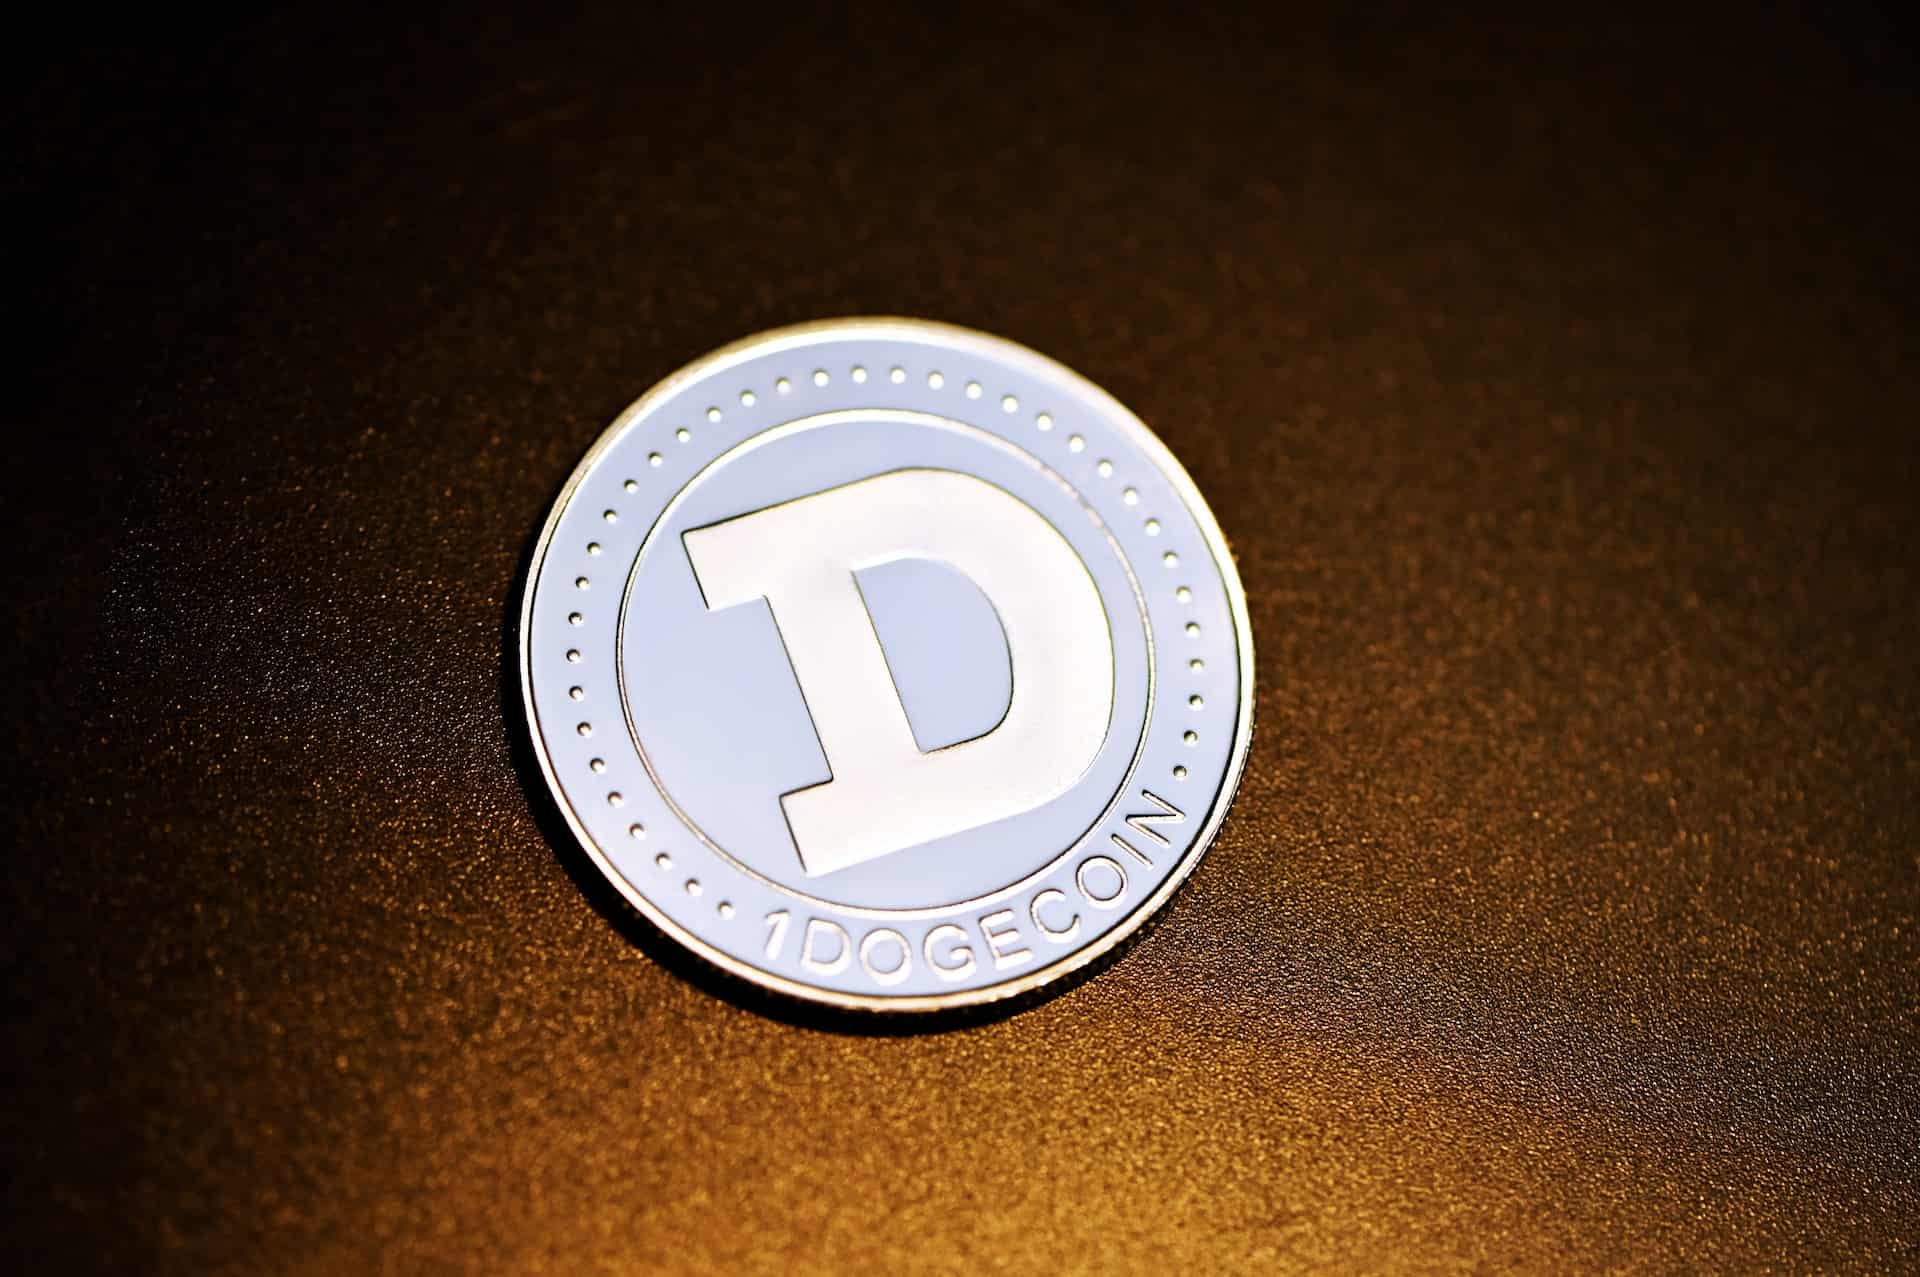 Dogecoin's Transactions Hit ATH As DRC20 Tokens Pump Up The Network